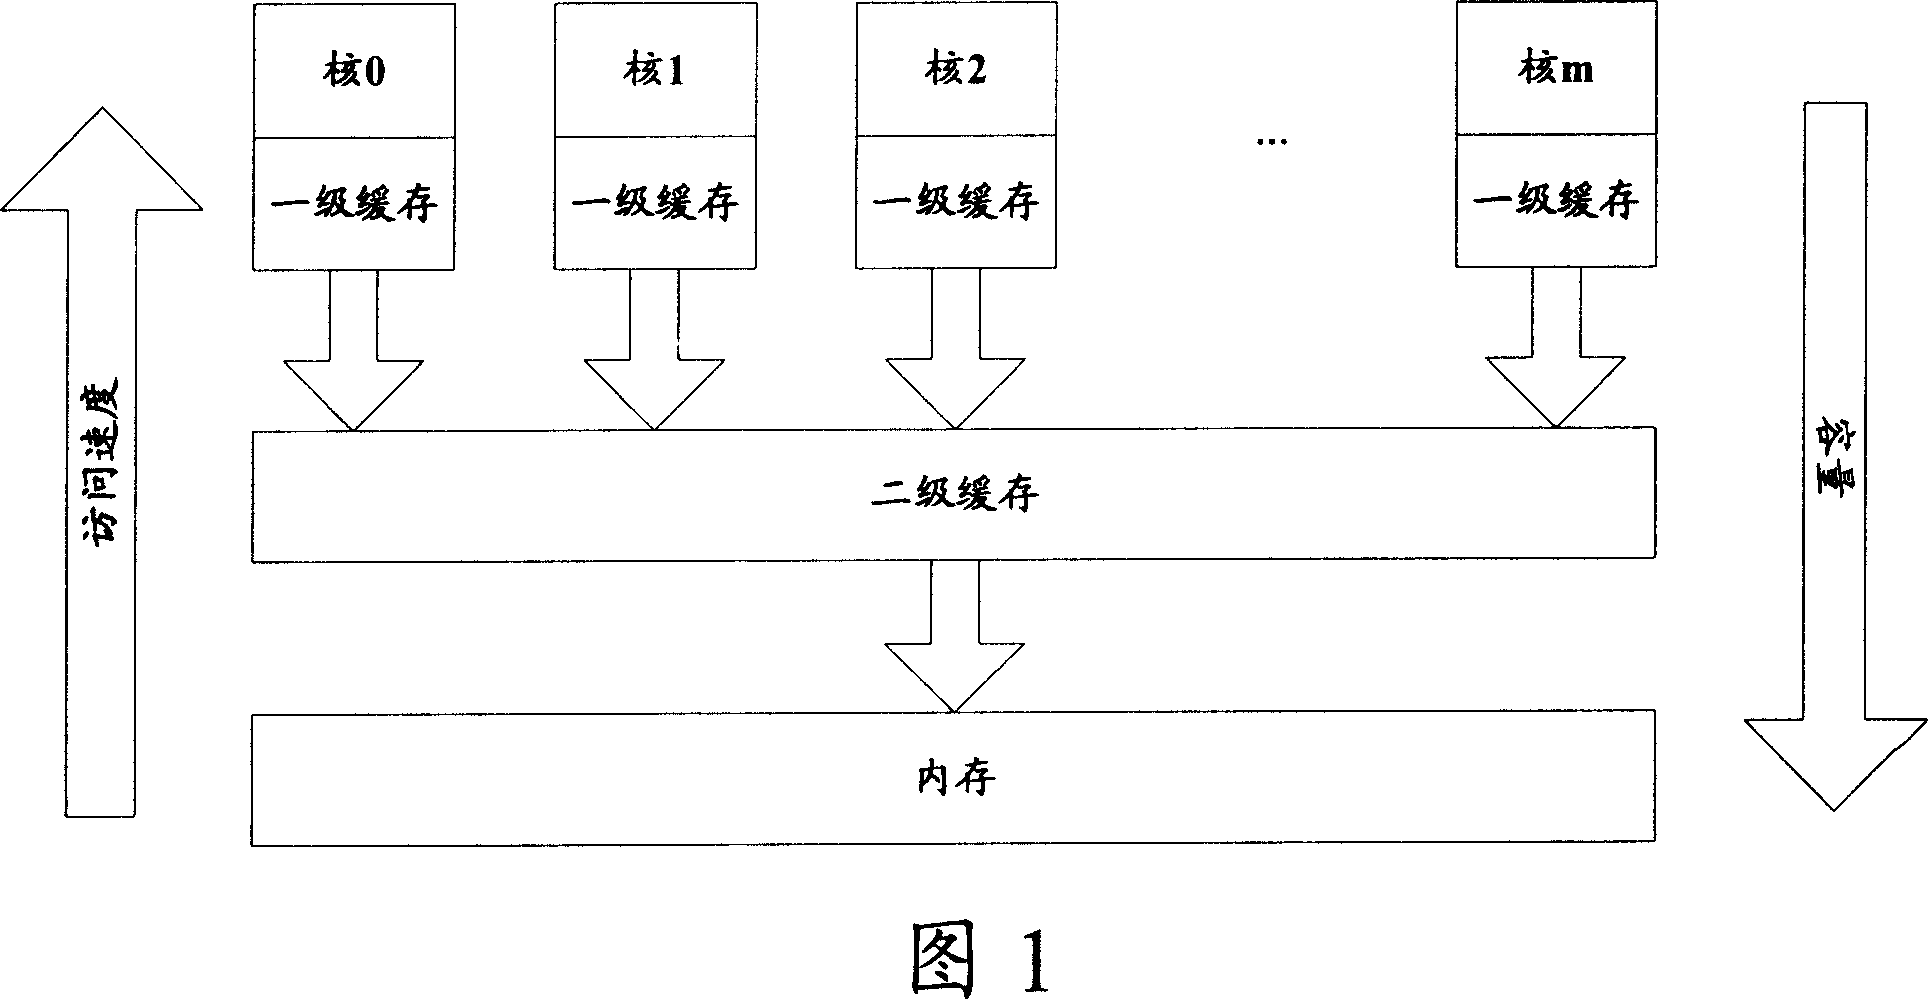 Method and apparatus for global statistics in multi-core system